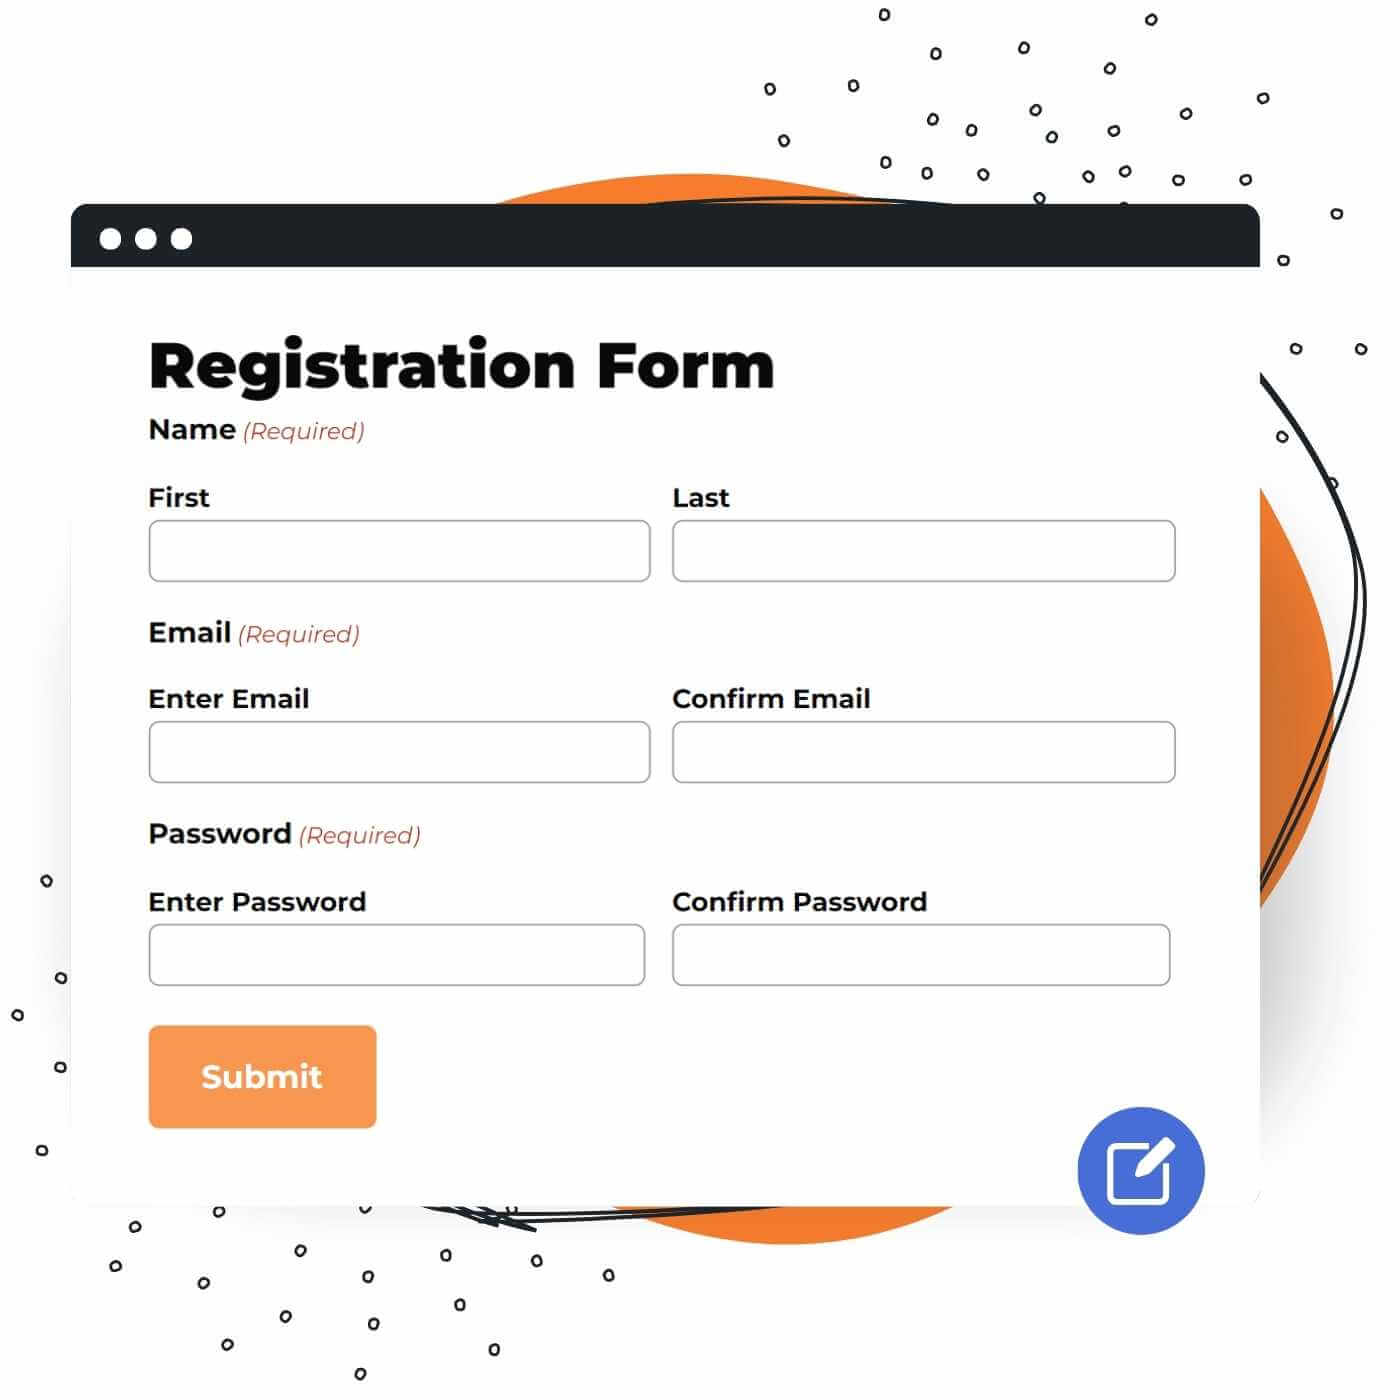 Customize the student registration form using Gravity Forms and LifterLMS